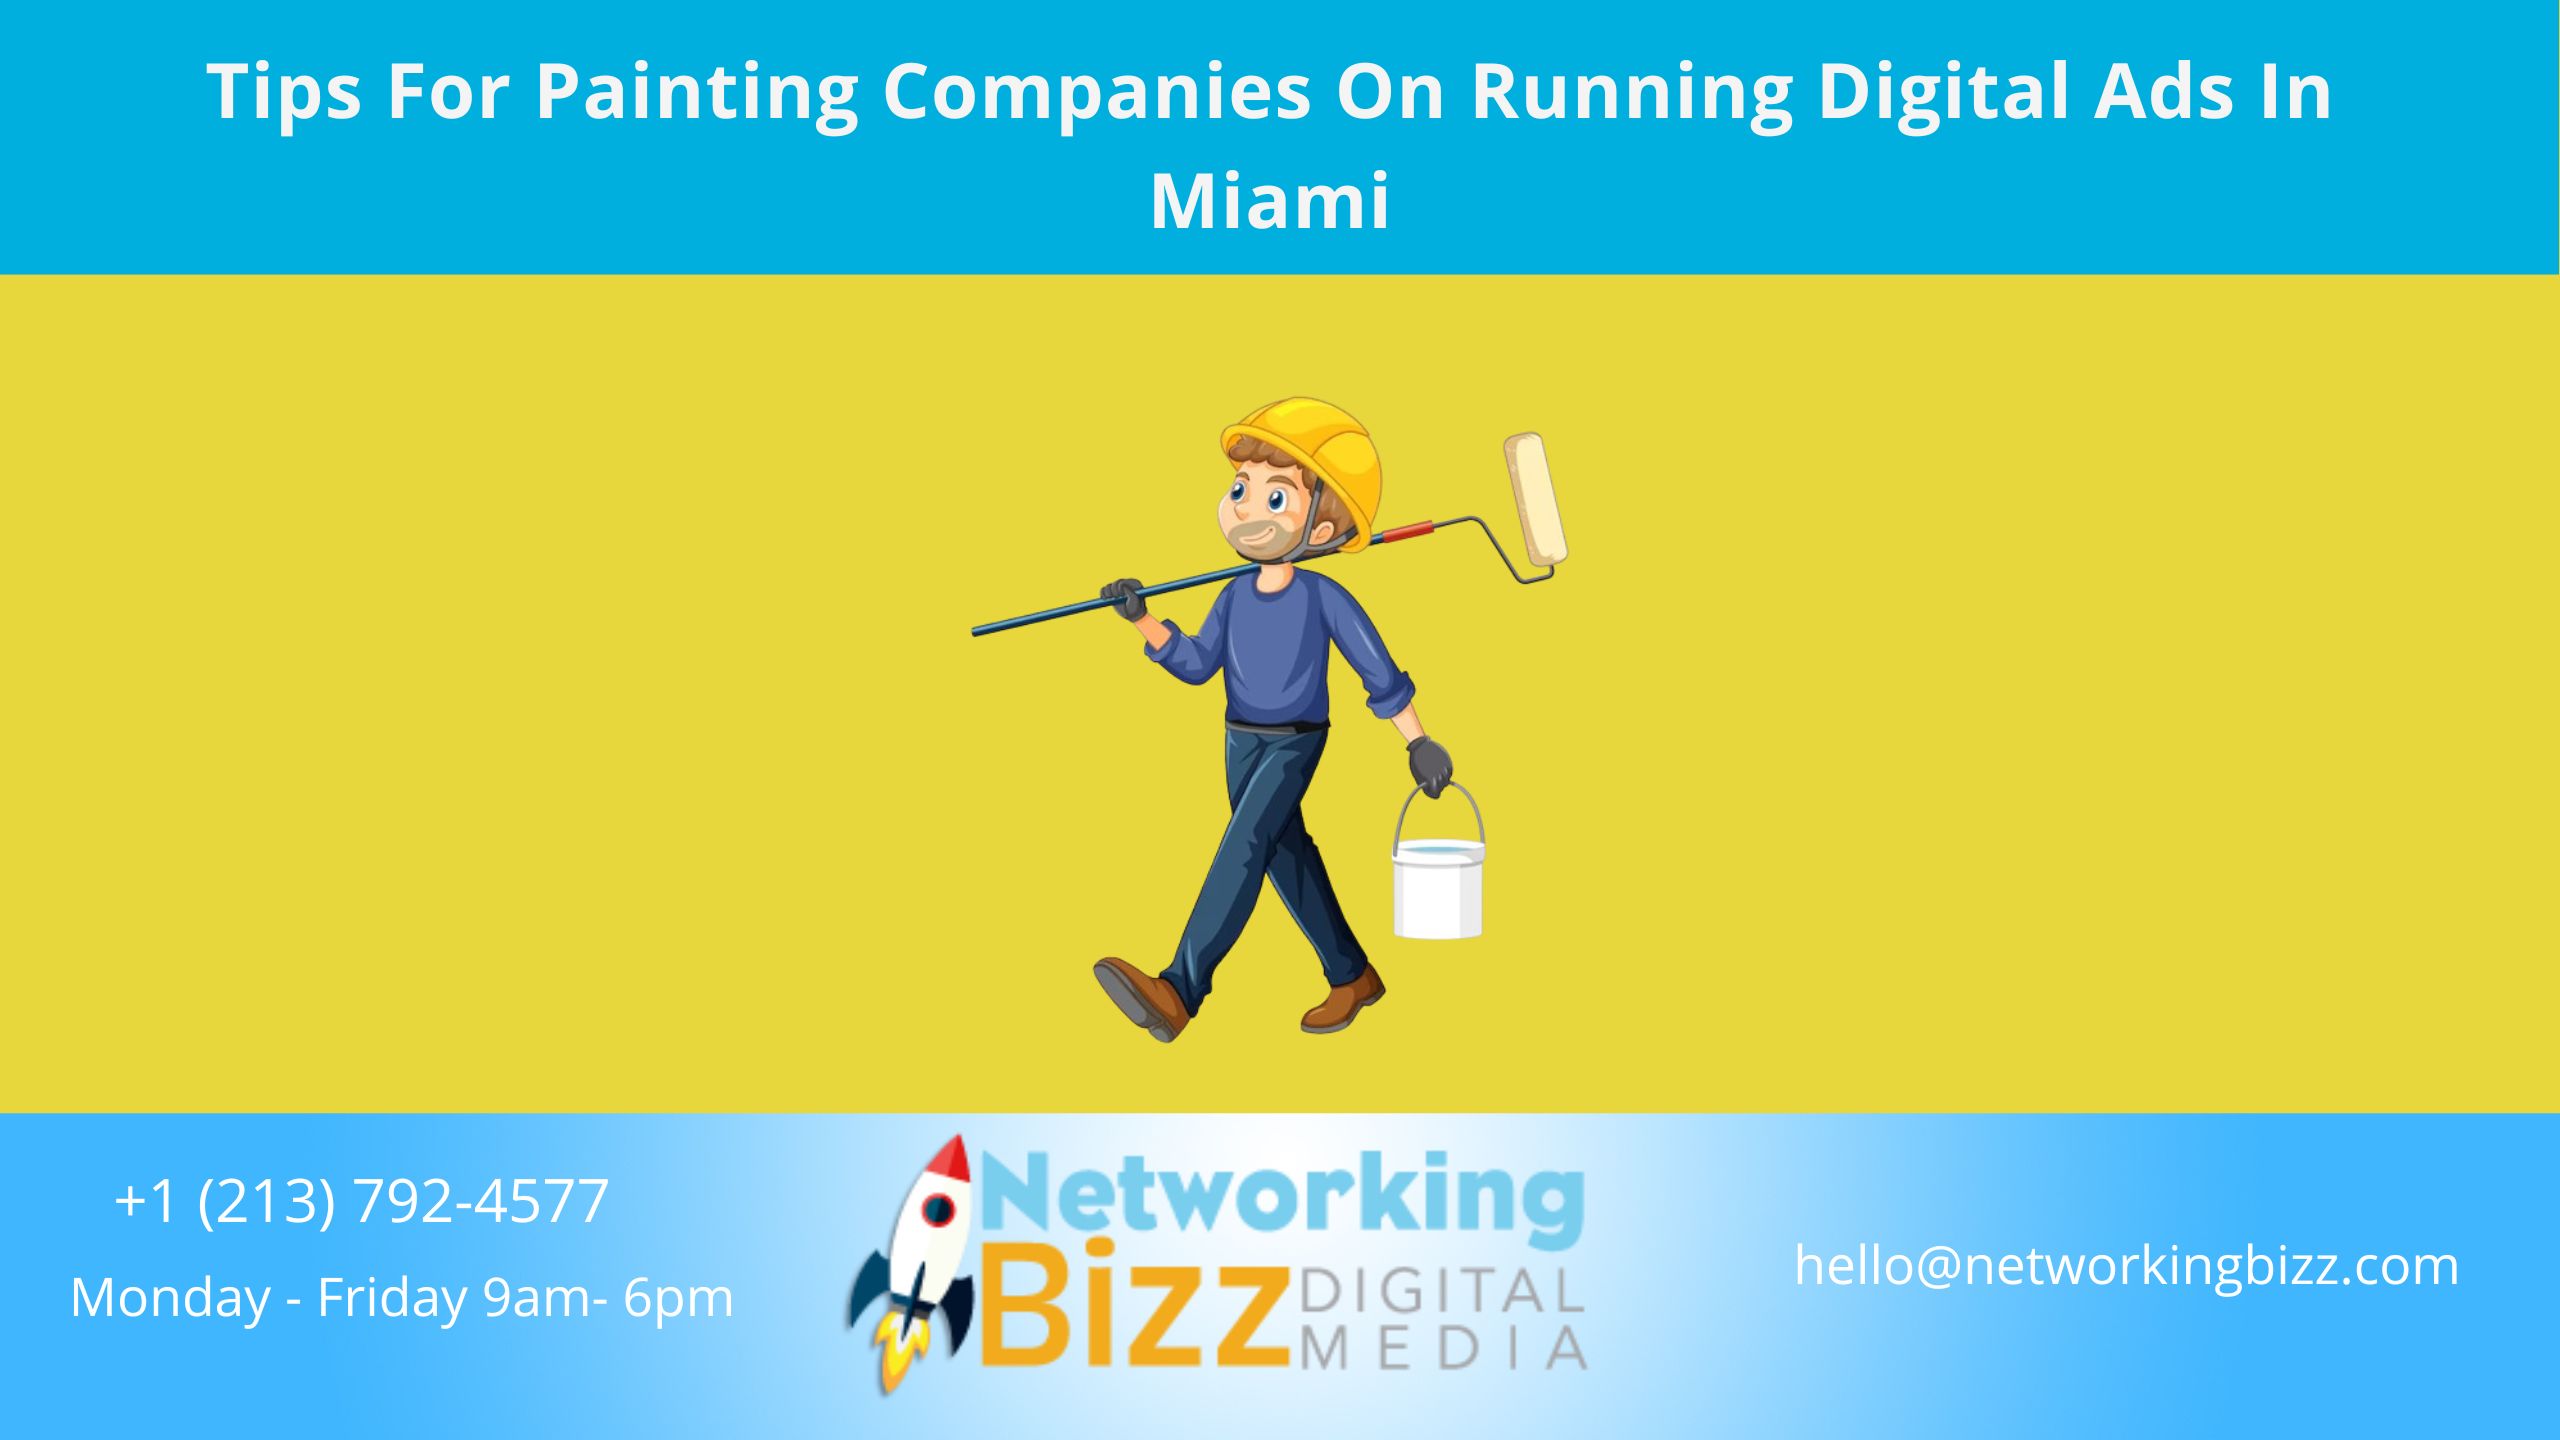 Tips For Painting Companies On Running Digital Ads In Miami